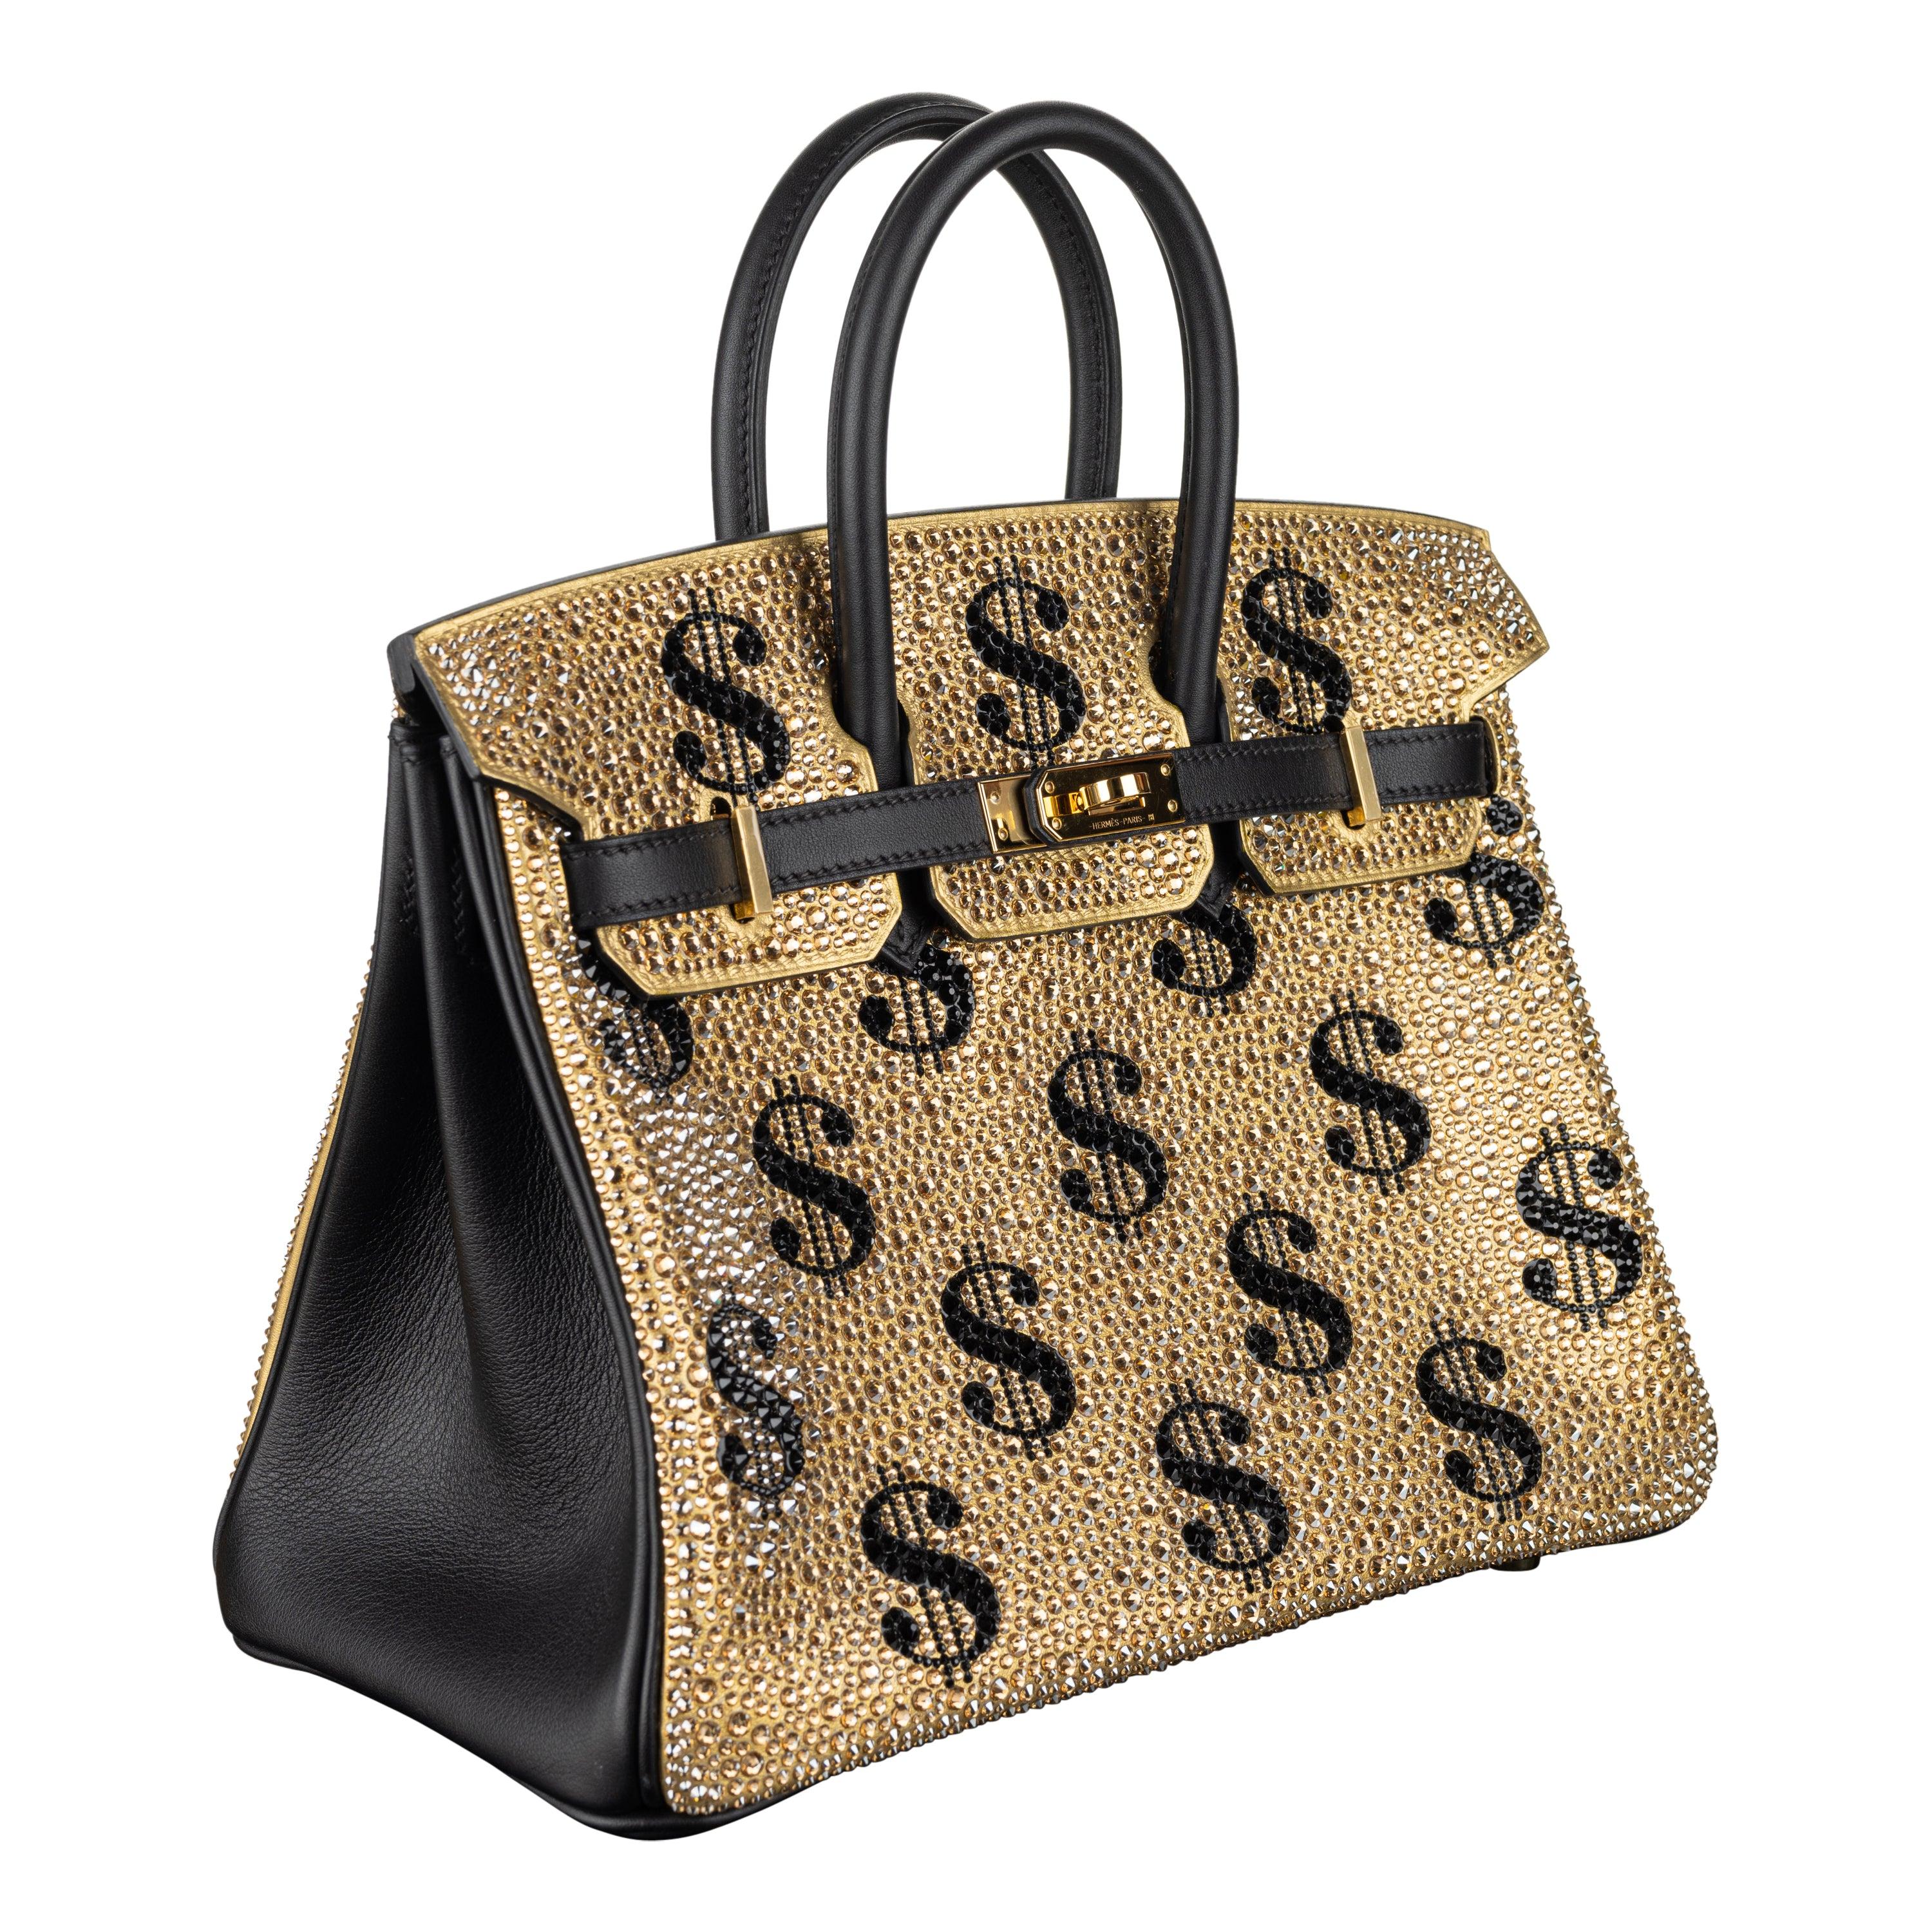 Moneybags x MB. This is a limited edition piece of transformative art on what was originally an unused Hermès 25cm Birkin. 
Hardware: Gold (GHW)
Dimensions: 10